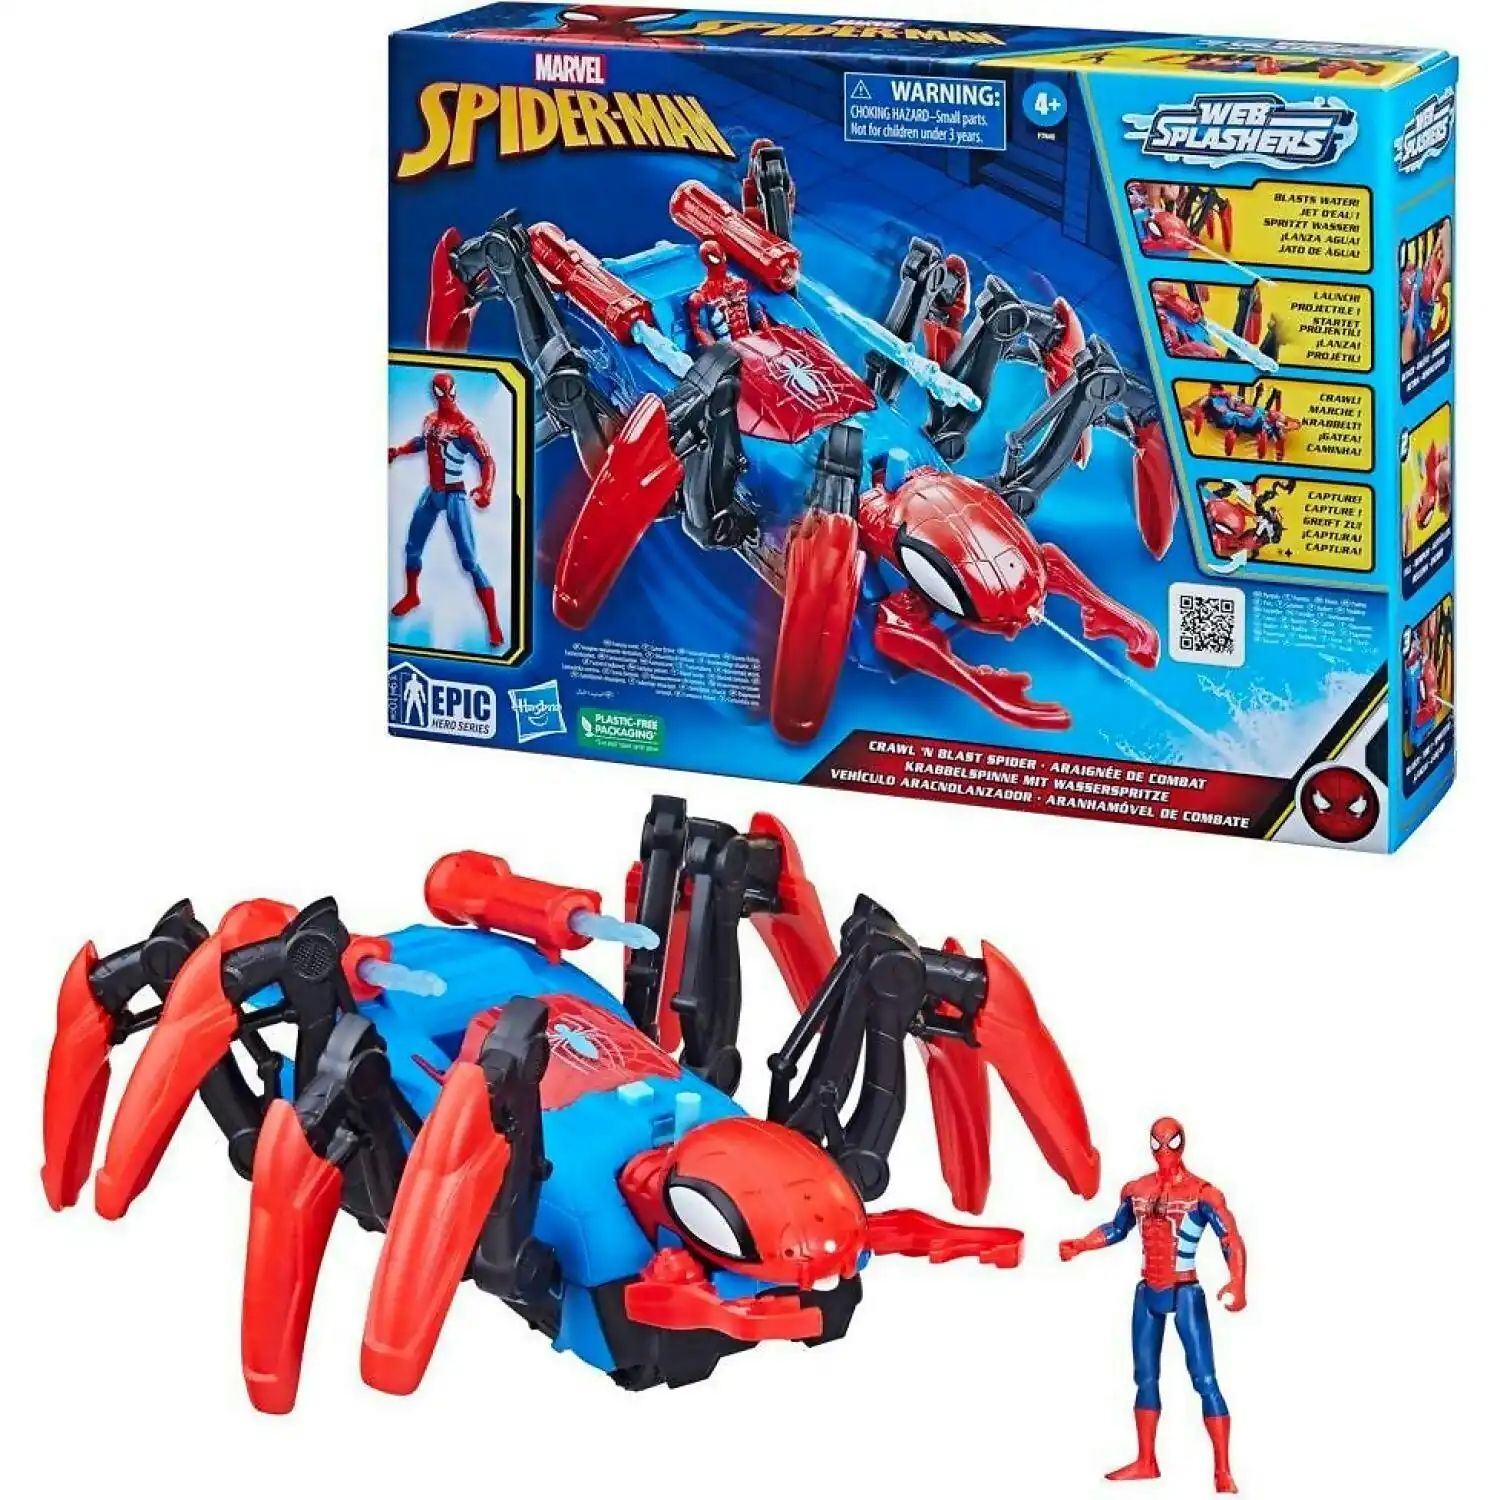 Marvel - Spider-man Crawl 'n Blast Spider With Action Figure 2-in-1 Blast Feature Toy Cars